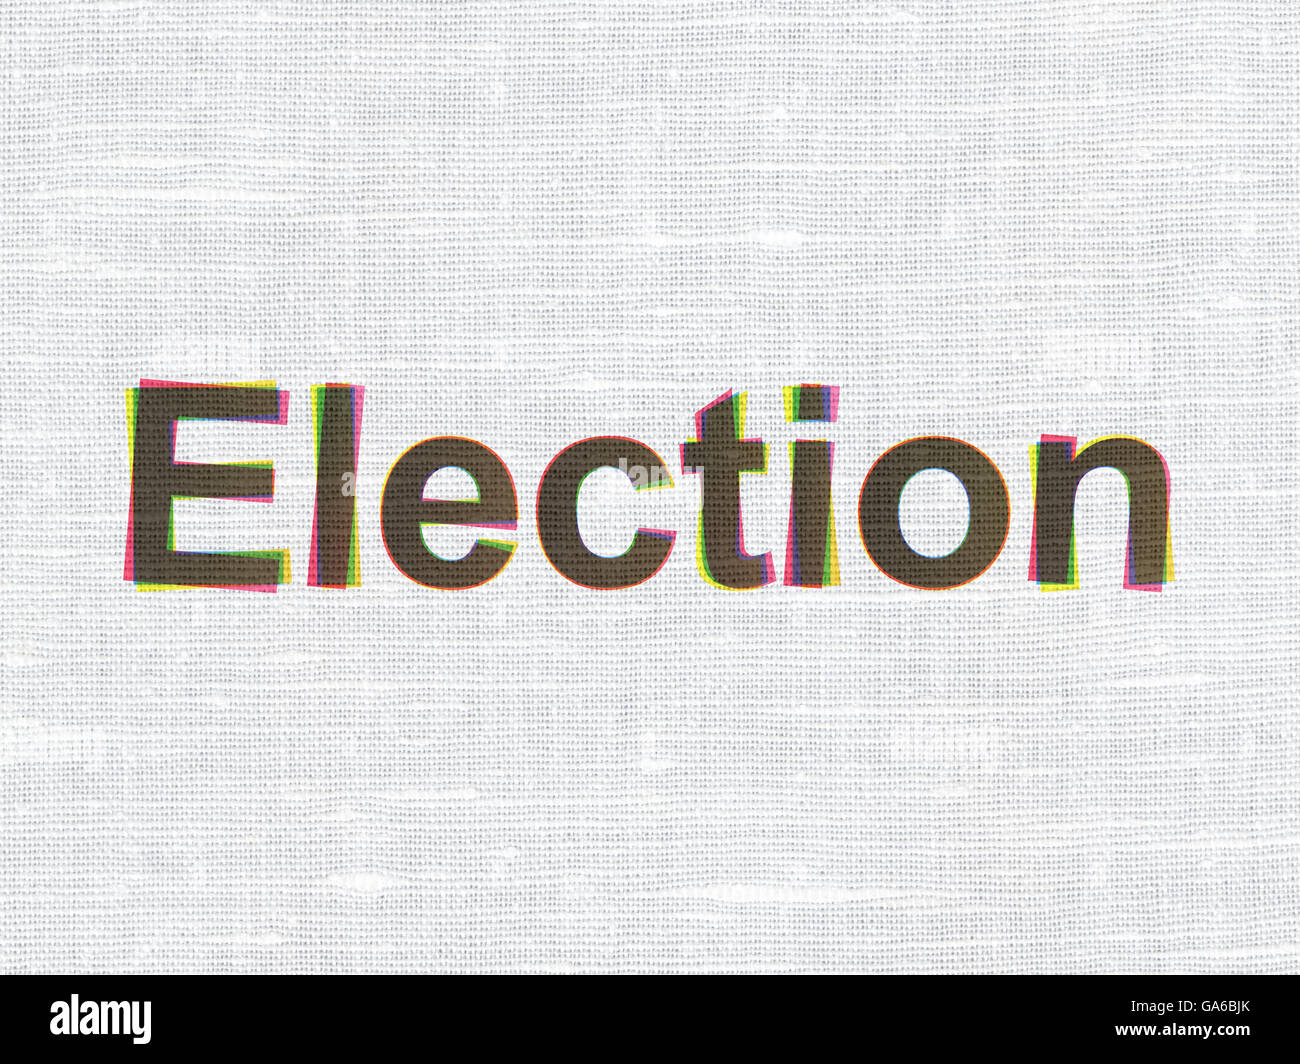 Politics concept: Election on fabric texture background Stock Photo